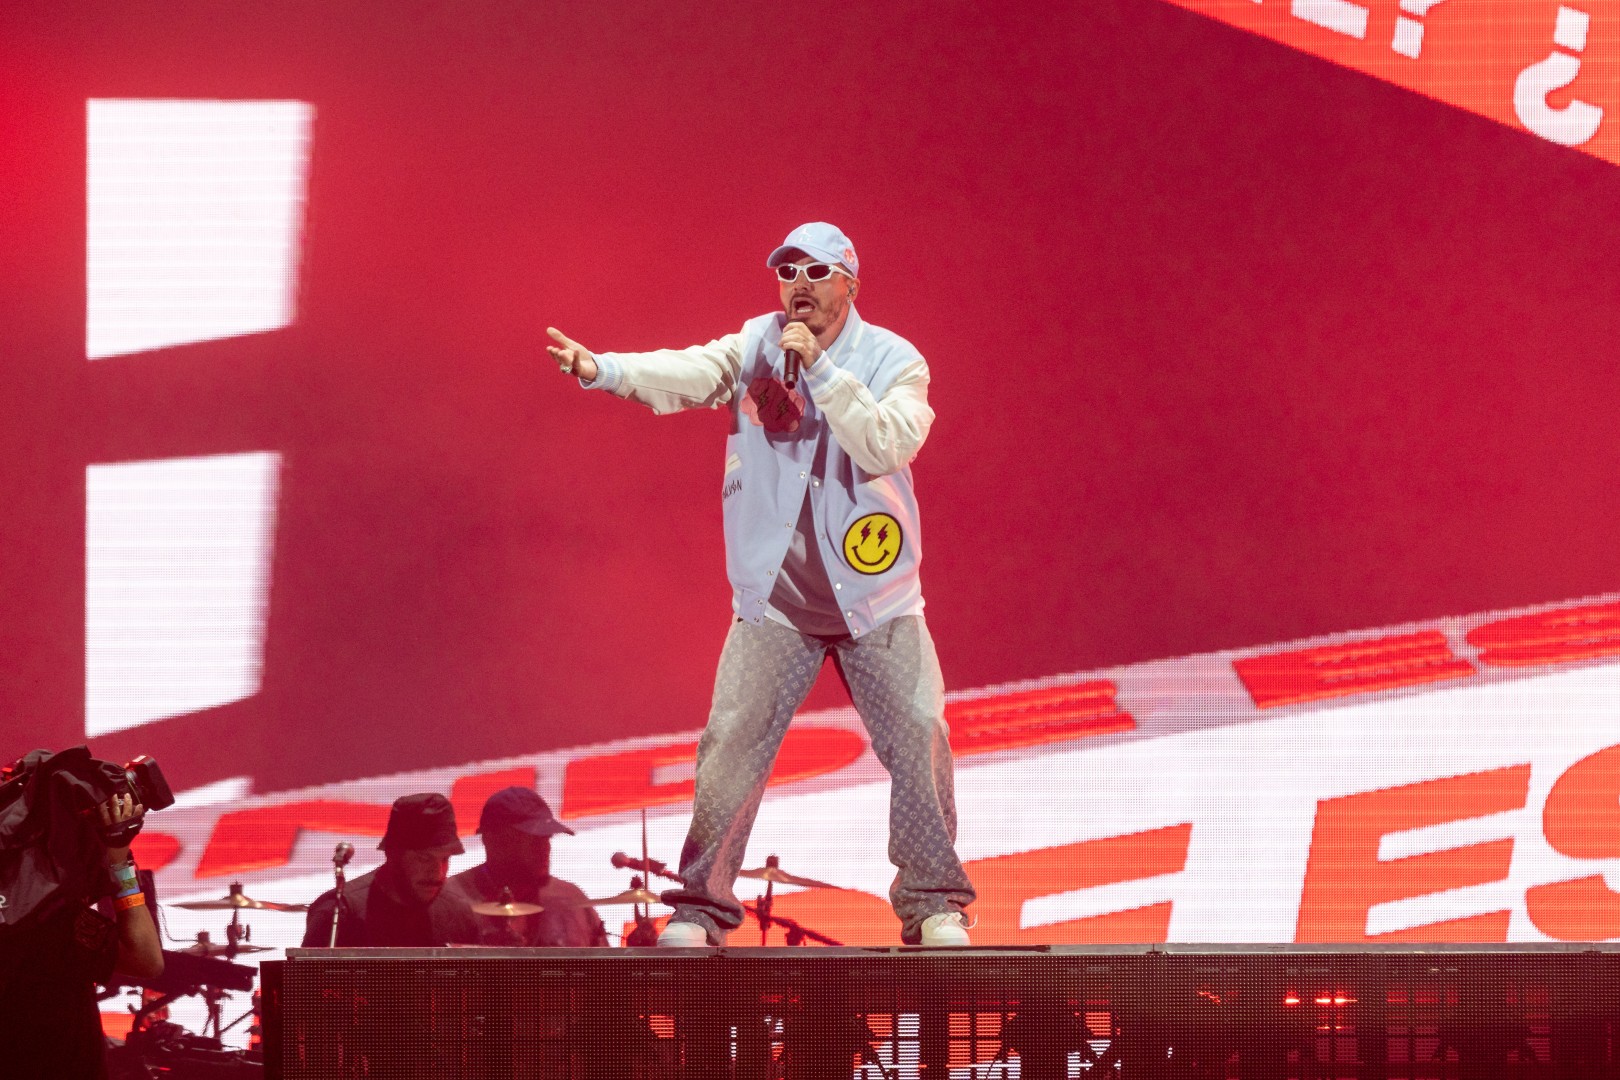 J Balvin at Cluj Arena in Cluj-Napoca on August 7, 2022 (4ddb975d55)